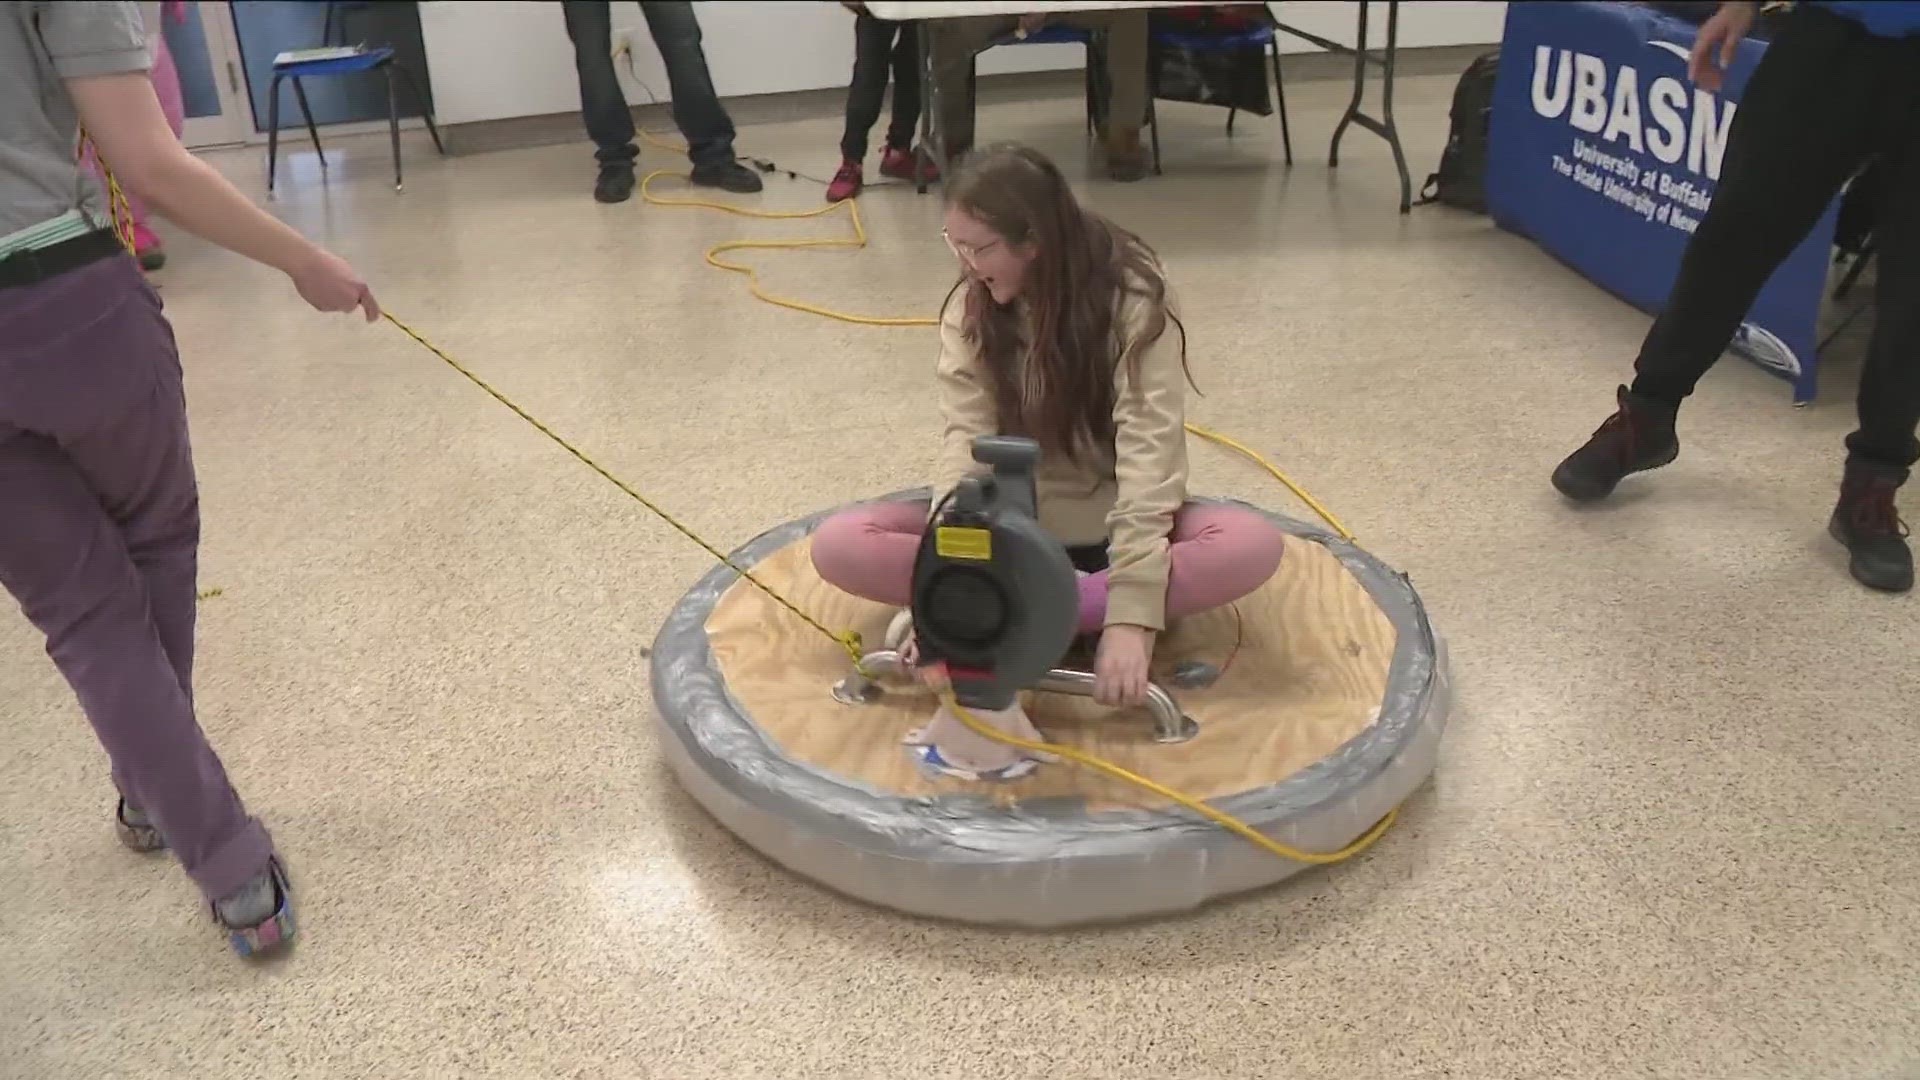 Students from University of Buffalo showed kids what UB engineering clubs have to offer.